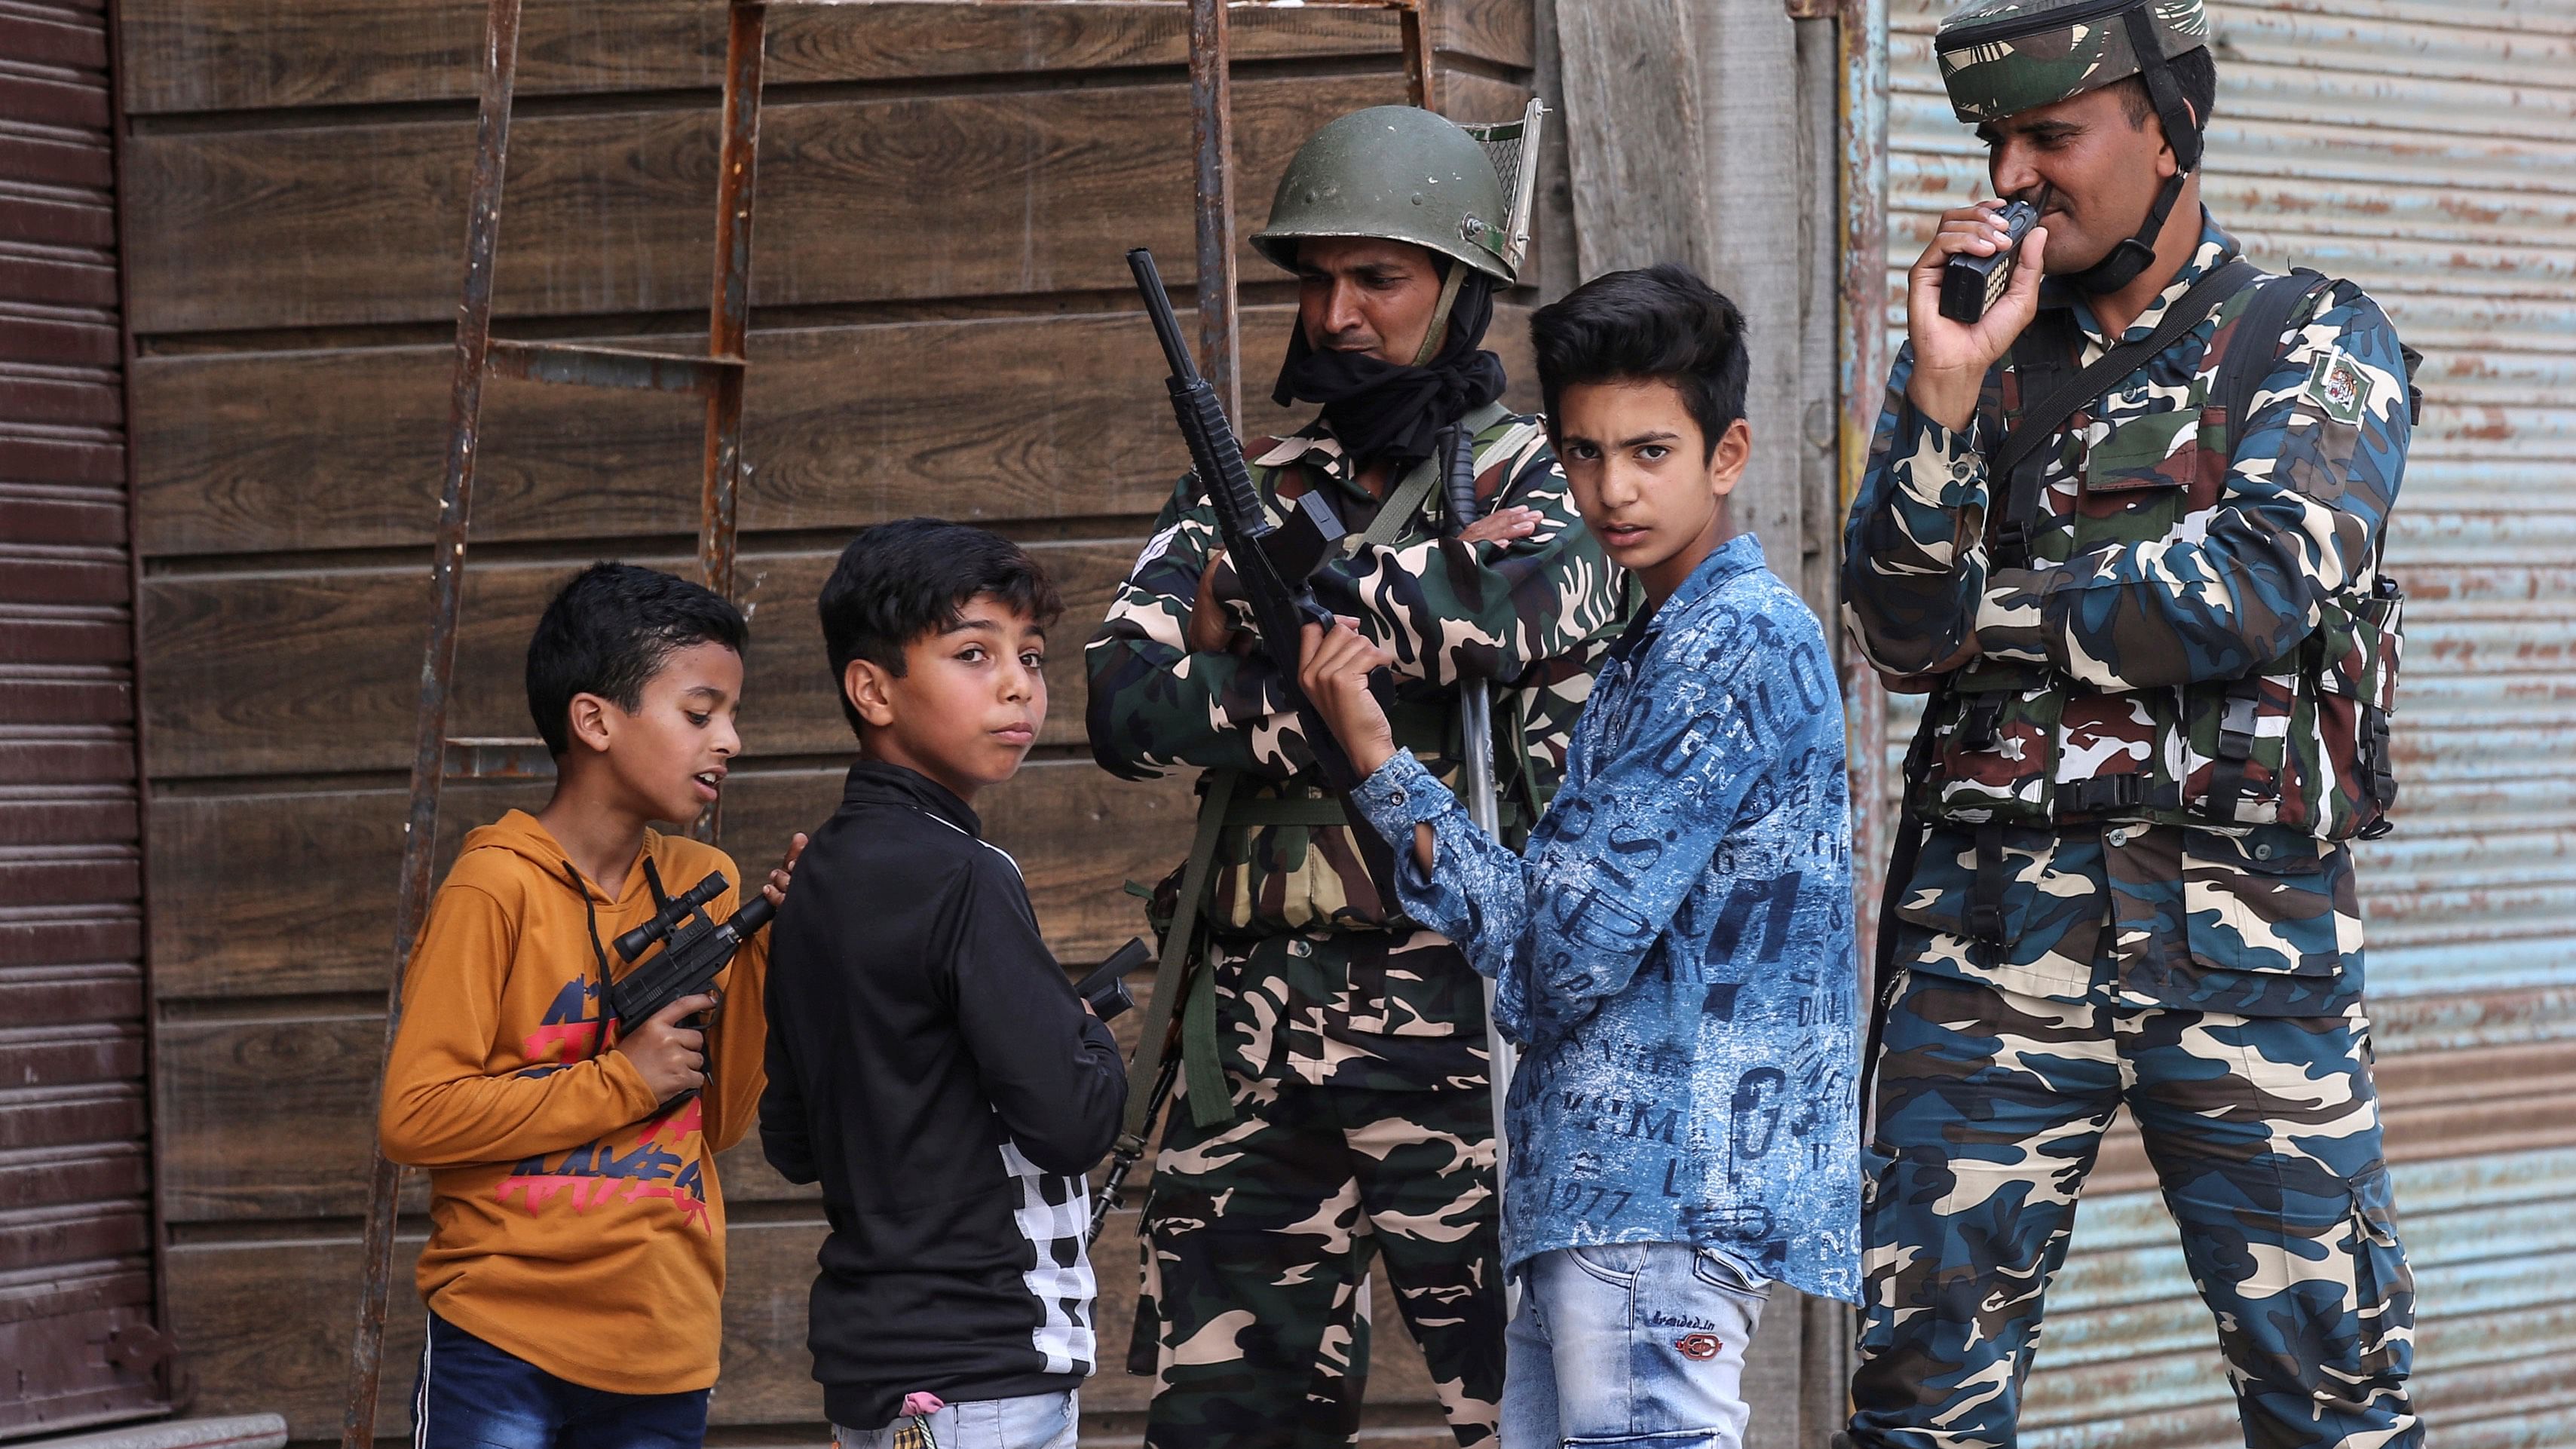 Children play with toy guns next to Indian security force personnel during restrictions after the scrapping of the special constitutional status for Kashmir by the government, in Srinagar. Credit: Reuters File Photo